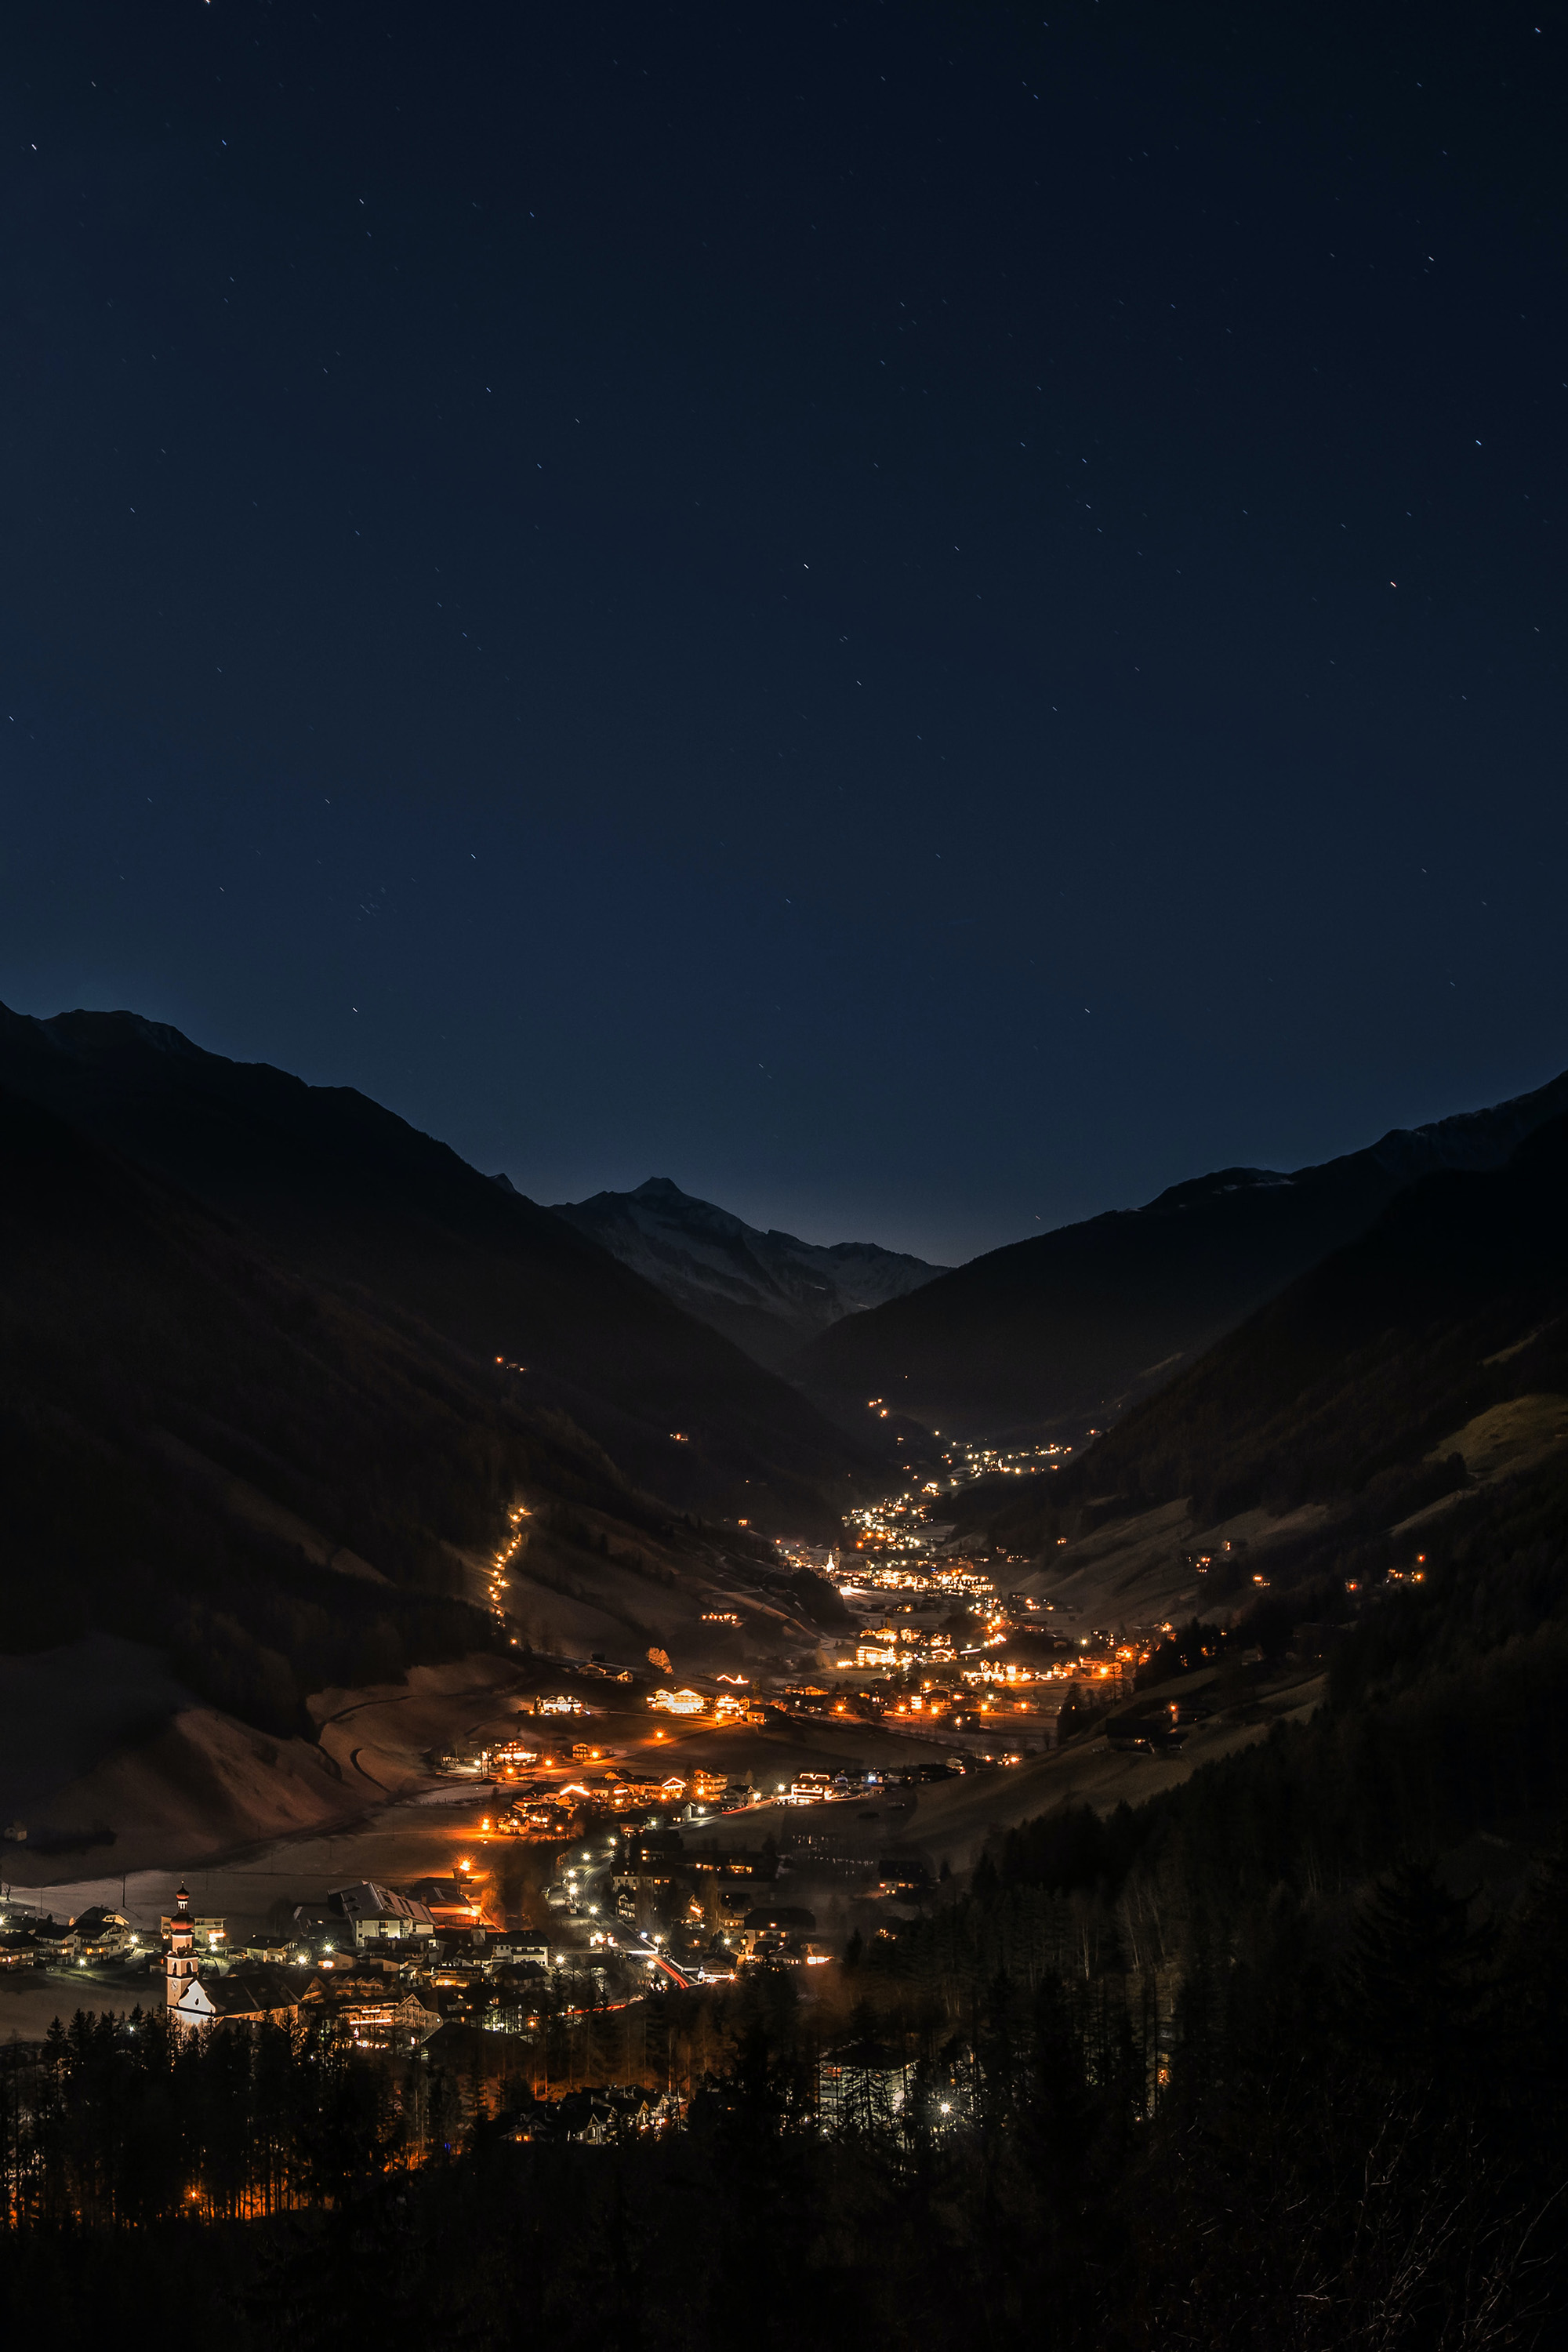 A tranquil night in a mountain valley. A town’s warm lights glow, surrounded by dark mountains under a starry sky.